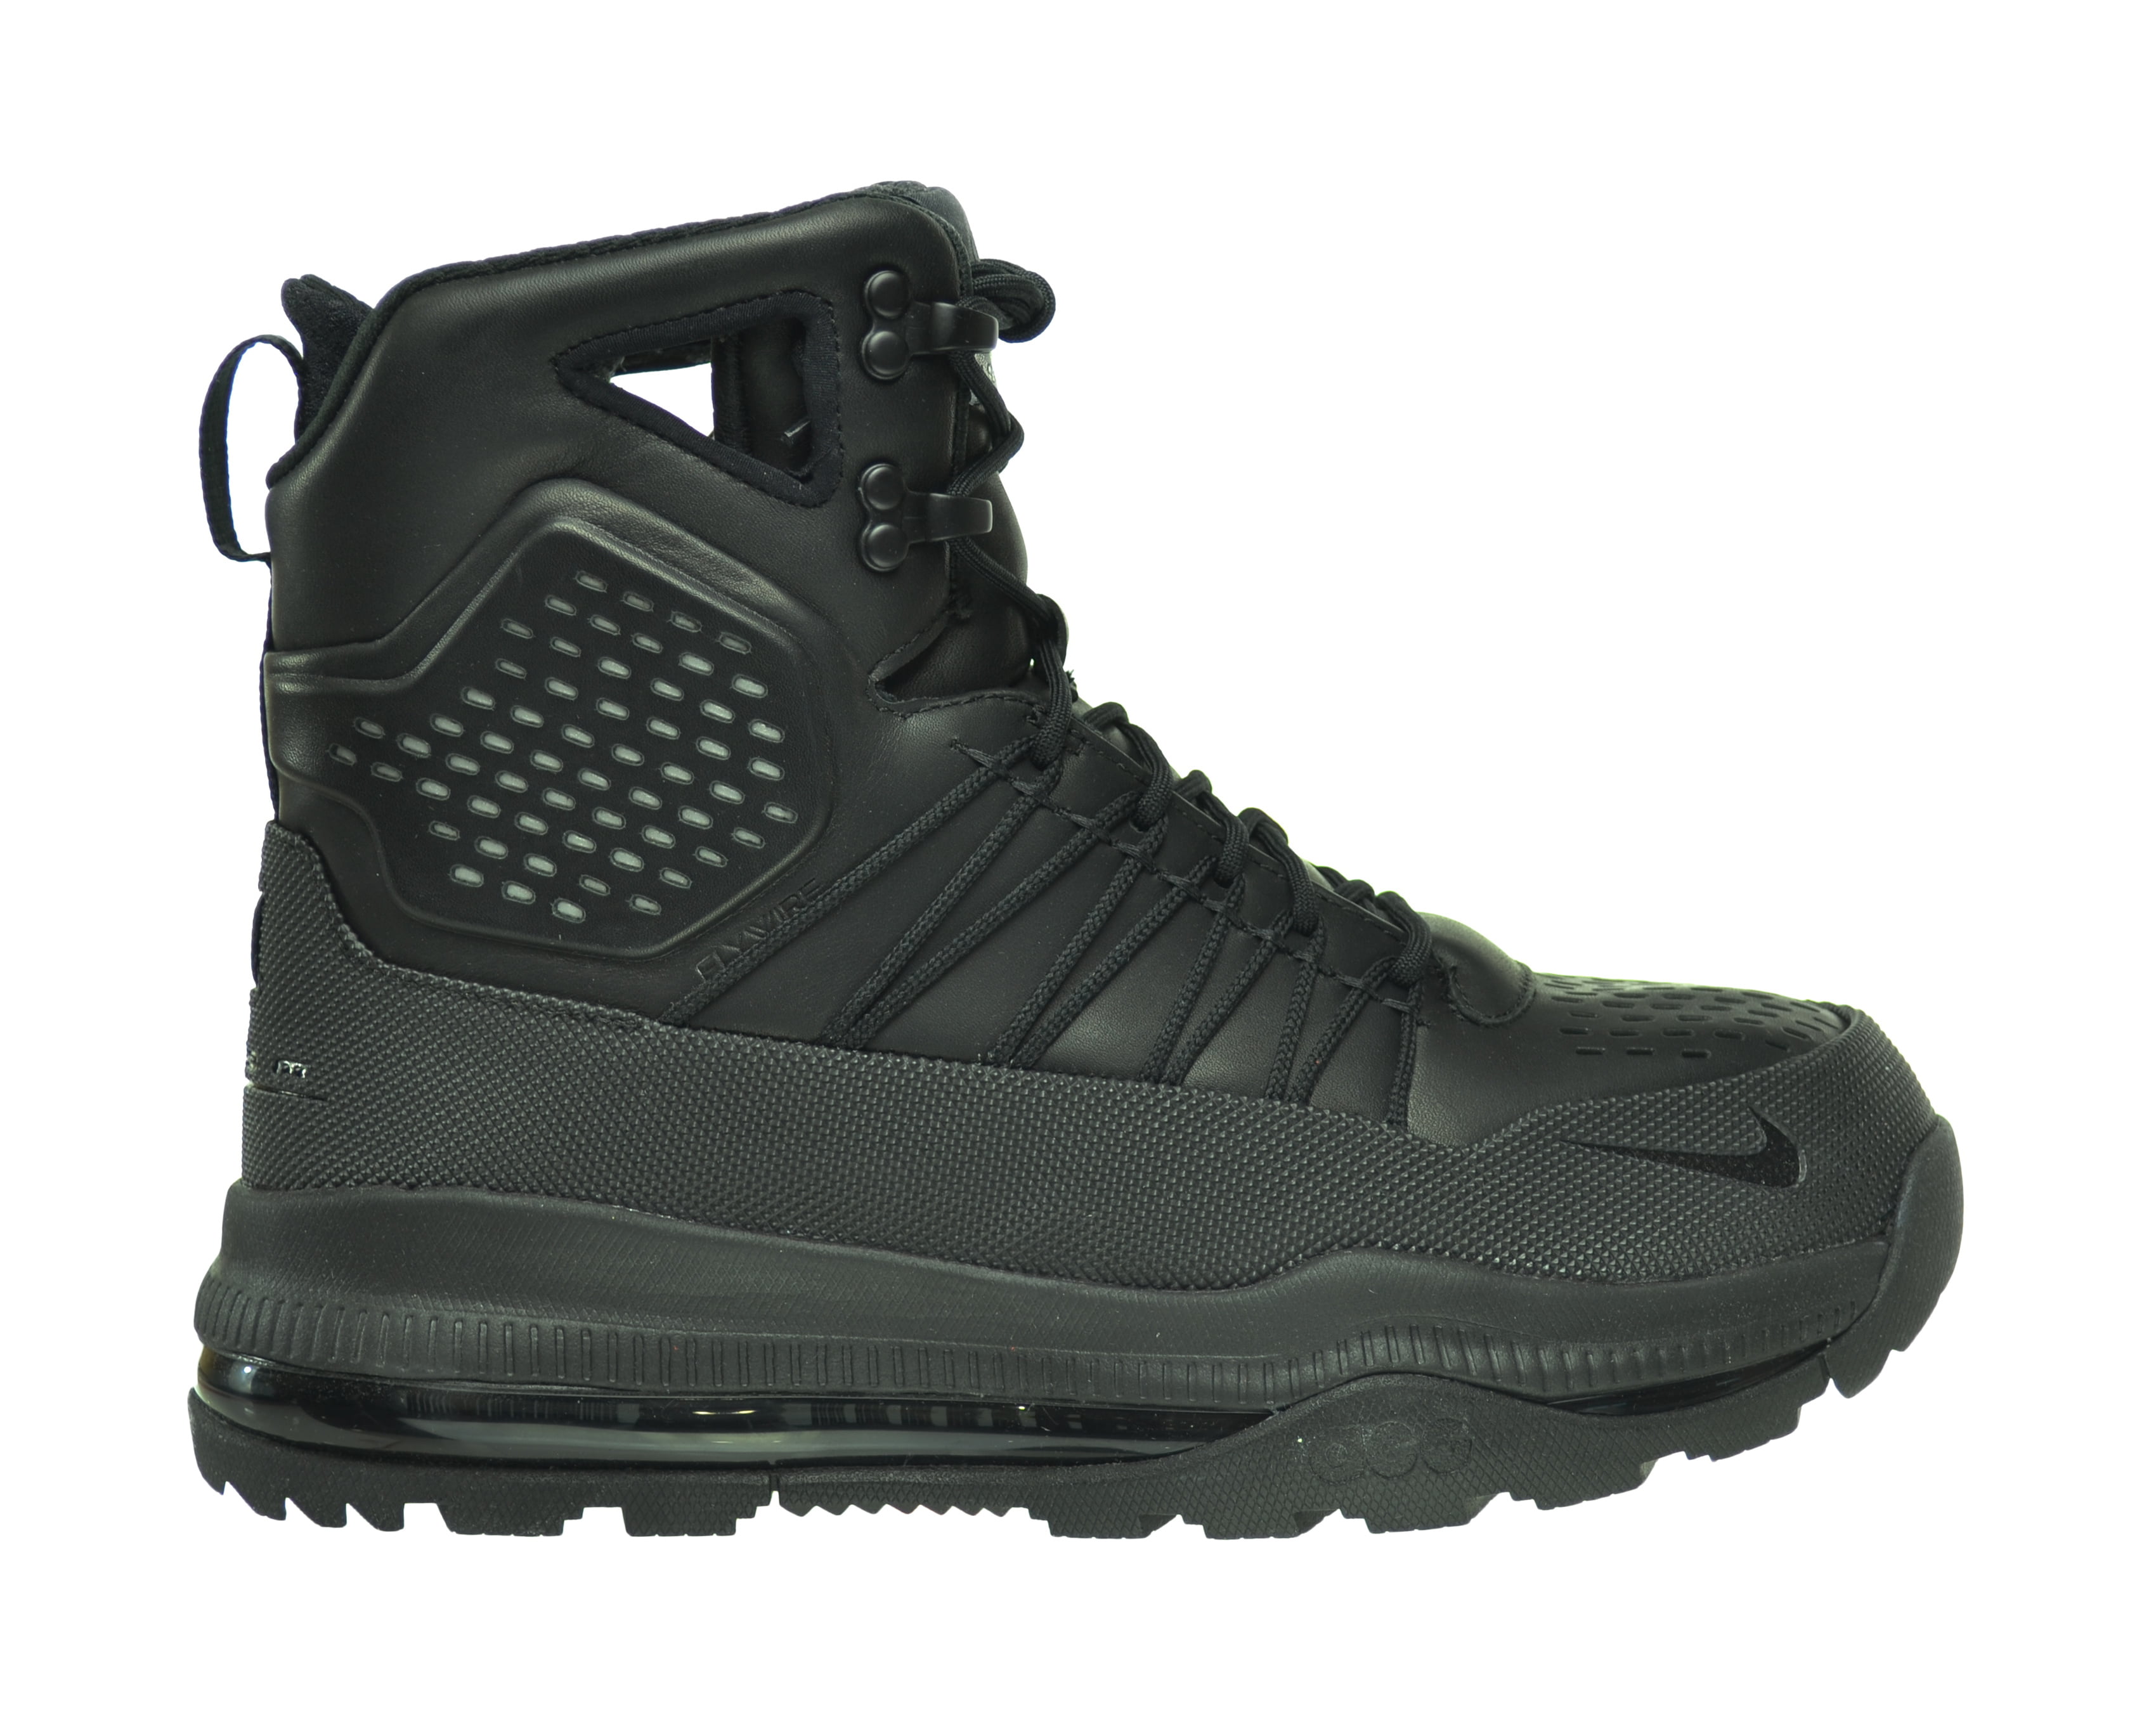 nike superdome acg boots